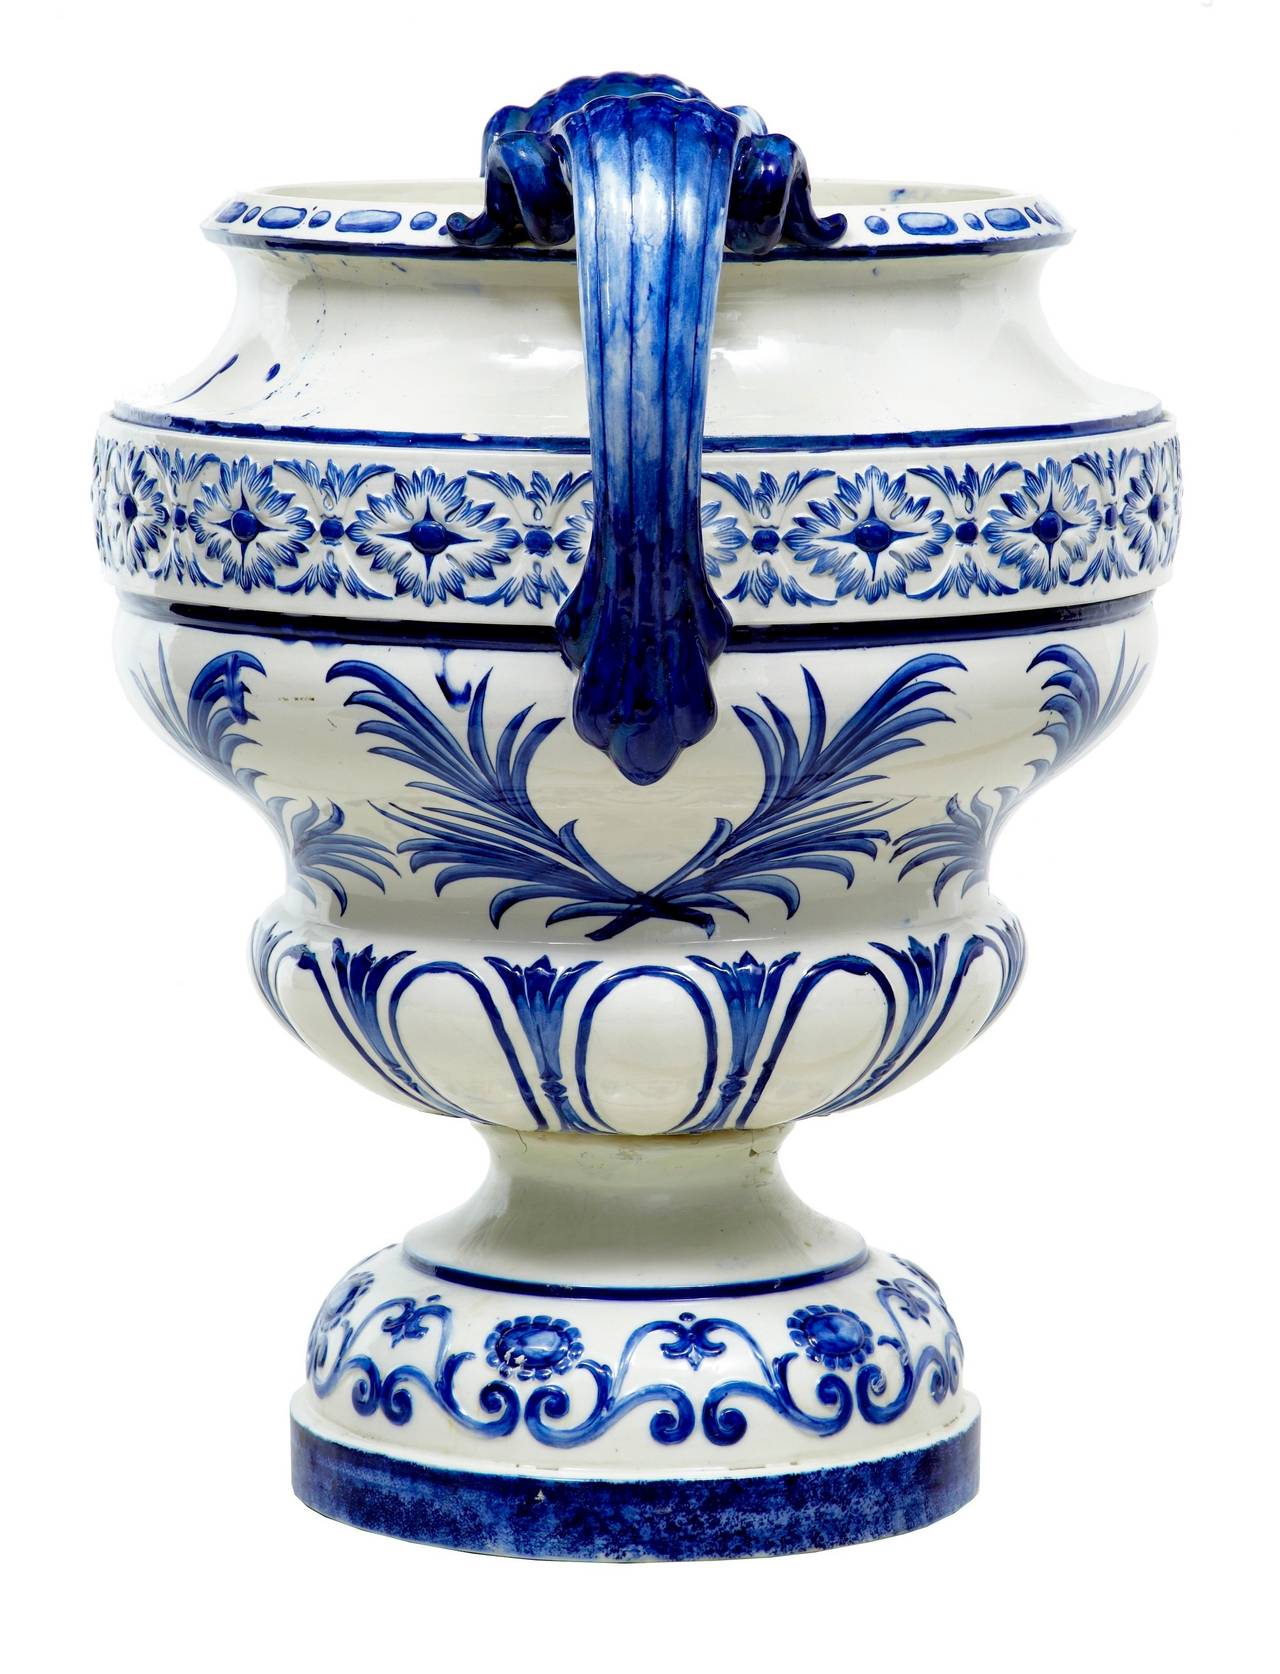 Early 20th century Rorstrand large ceramic urn.

Large blue and white urn by the renowned maker Rorstrand, stamped, 1901.

Rorstrand are a Swedish company that have been making fine quality porcelain and pottery since 1726 and still trade